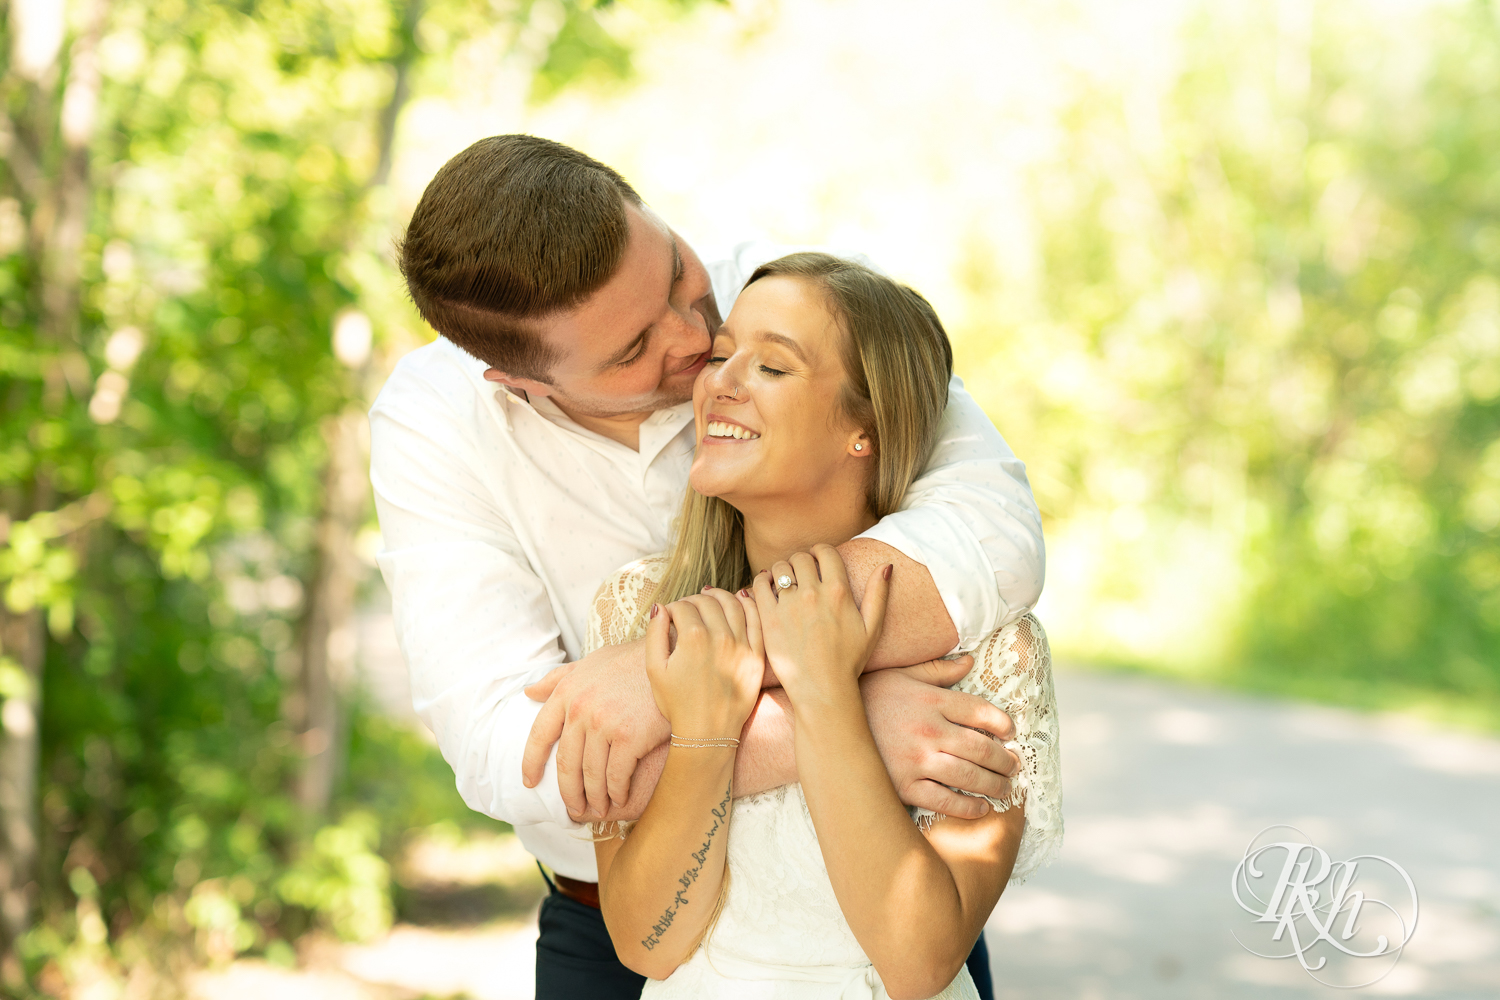 Man and woman dressed in white smile during summer engagement photography in Minnesota.